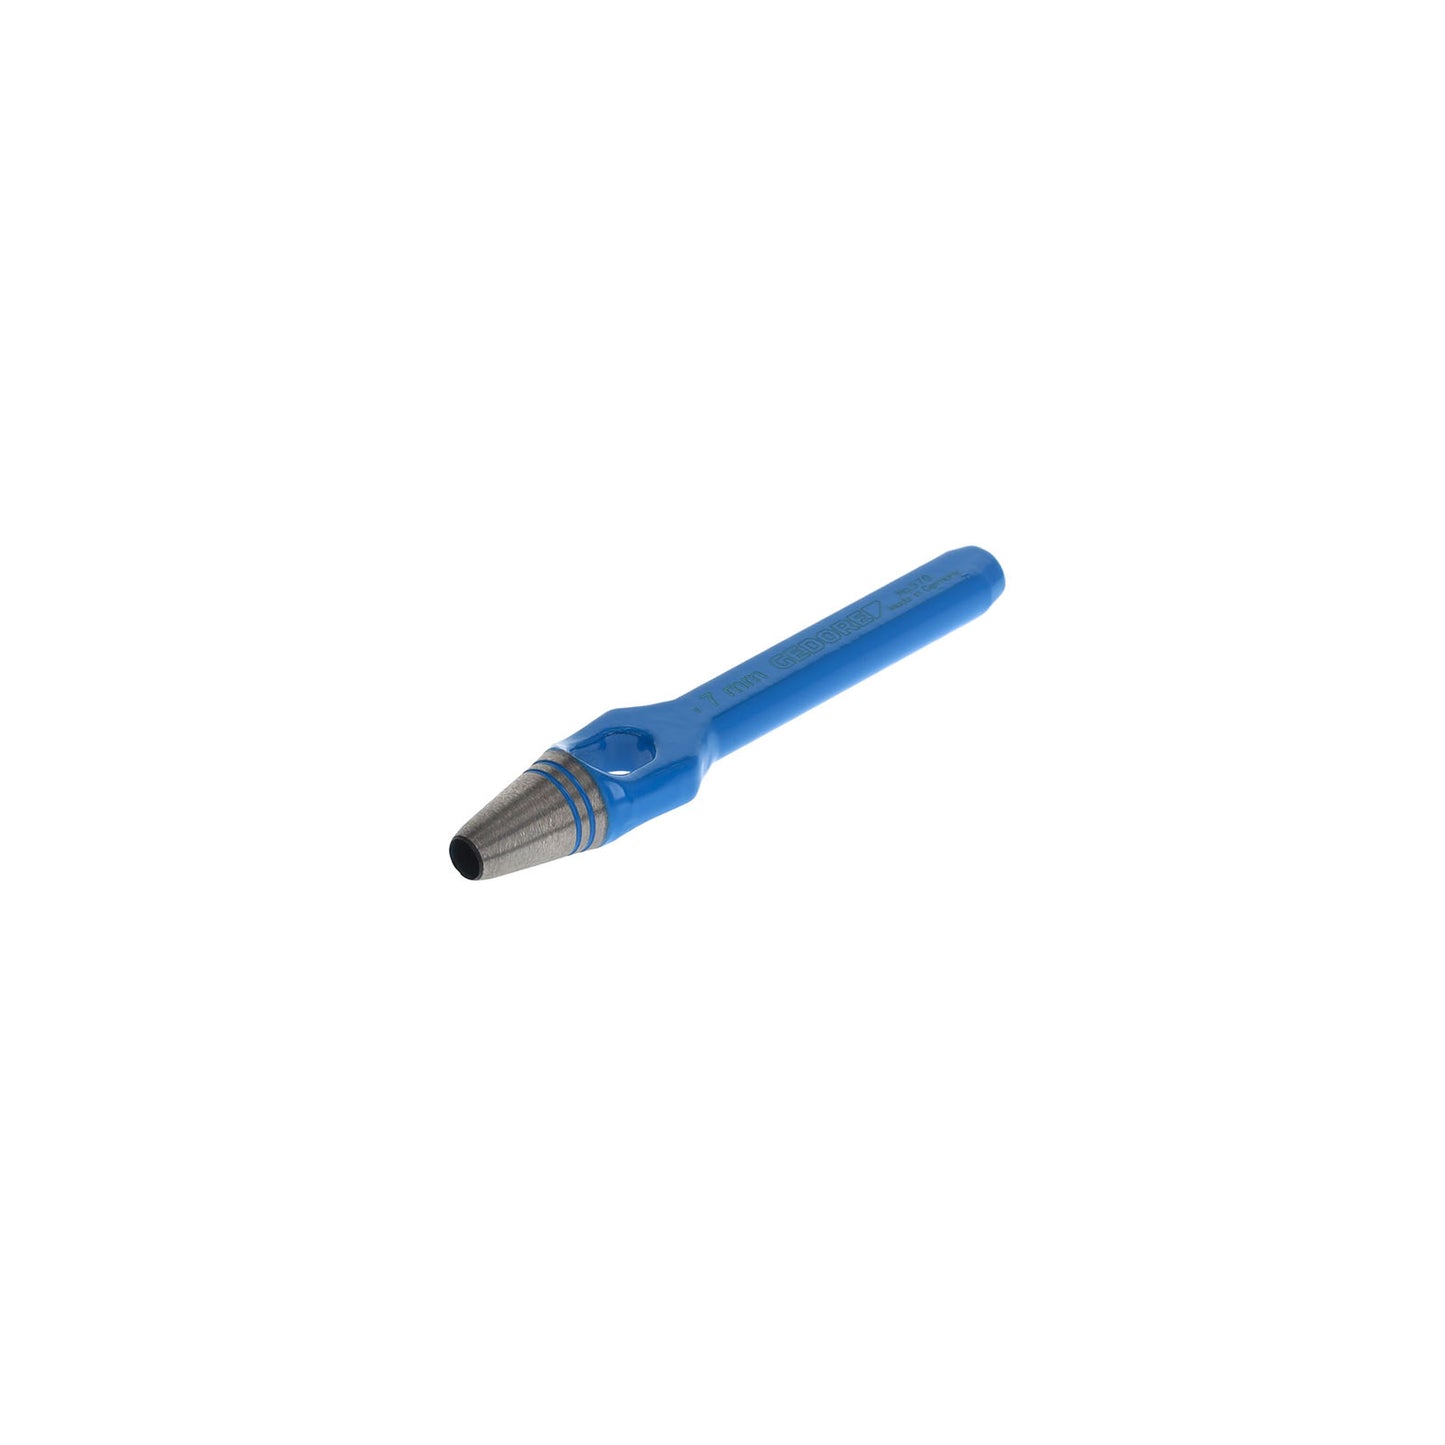 GEDORE 570007 - Rf. 570 7mm Puncher with DKO handle (4542810)